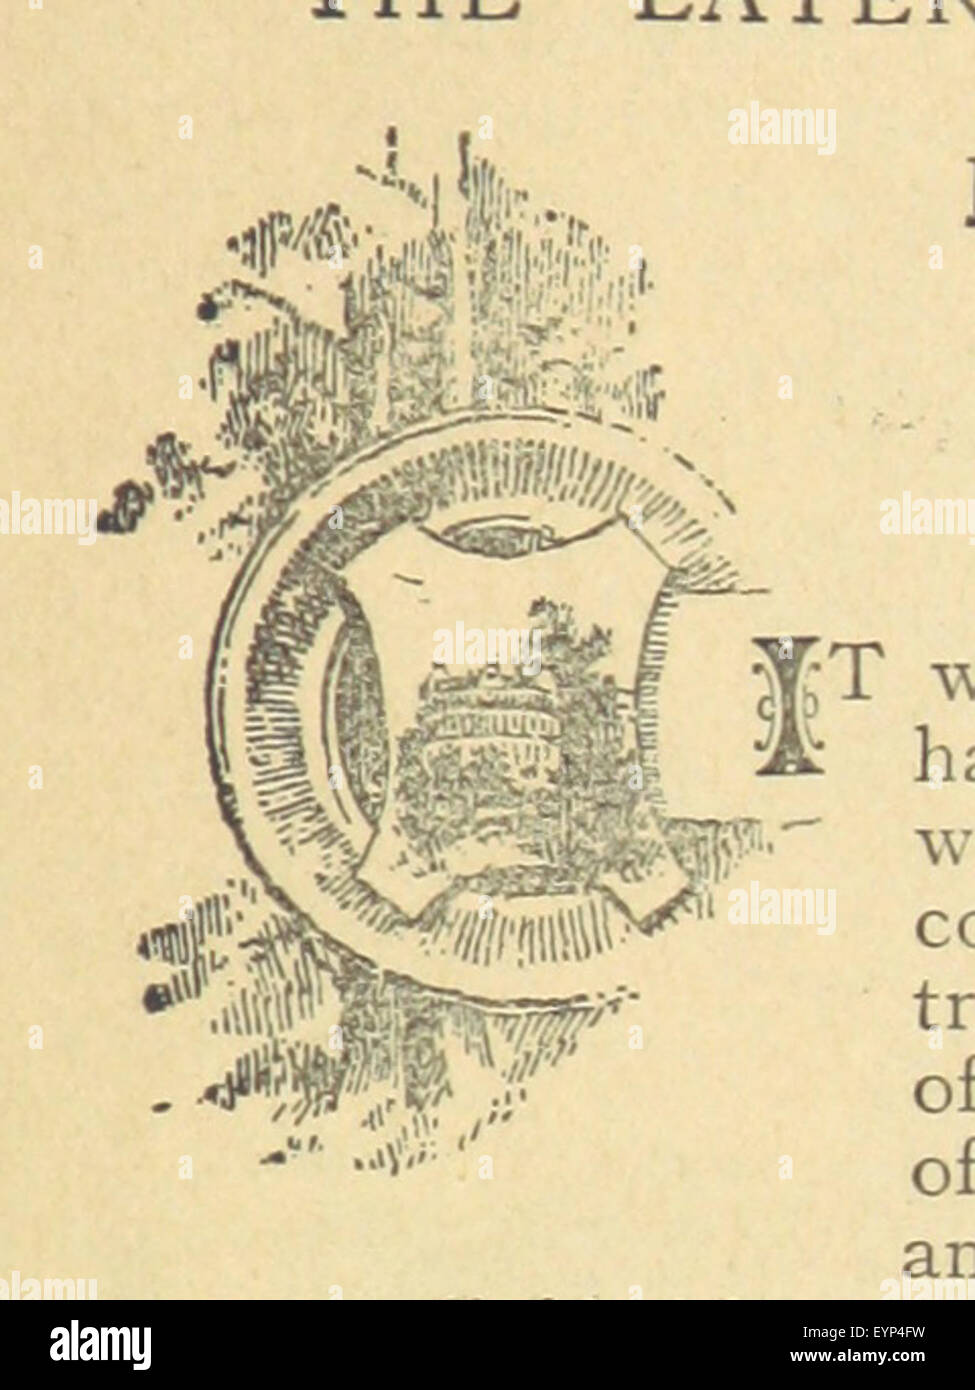 Image taken from page 45 of 'Second edition of Thorpe's New Illustrated Guide to Harrogate and District ... To which is added Walks and Footpaths around Harrogate, with twelve descriptive maps, and The Geology of Harrogate, by Wm. Grainge' Image taken from page 45 of 'Second edition of Thorpe's Stock Photo